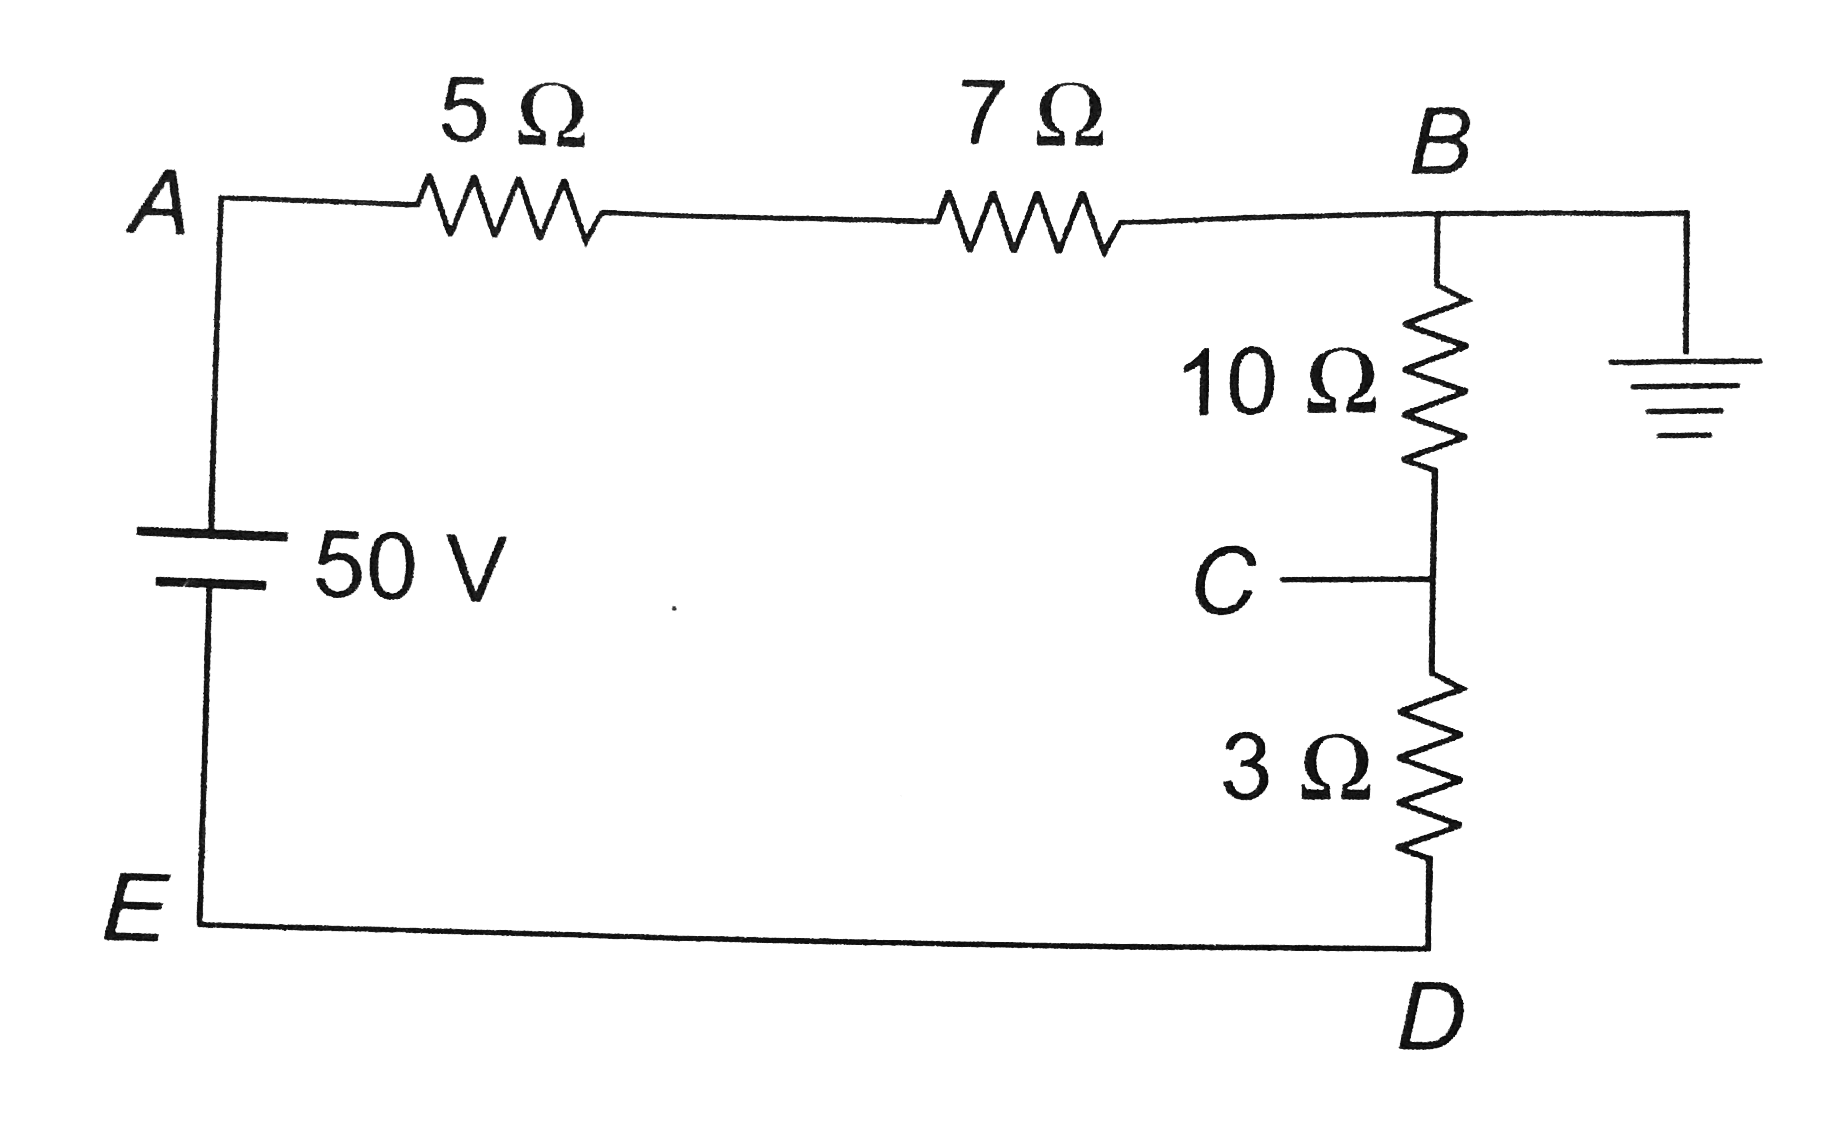 In the circuit shown, the point B is earthed. The potential at the point 'A' is